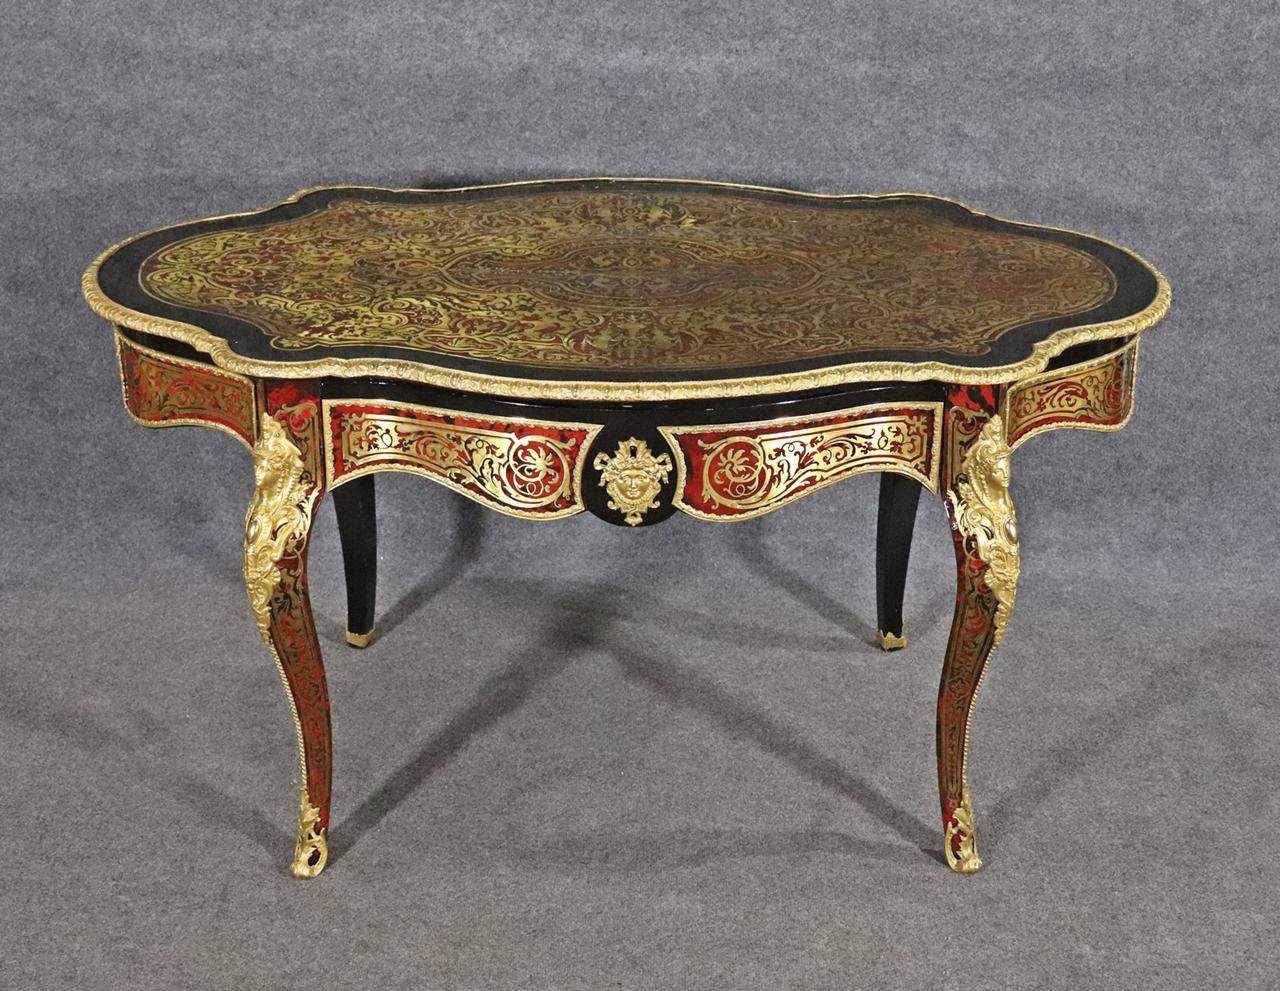 Gilt accents. Figural. One dovetailed drawer. 29 1/2